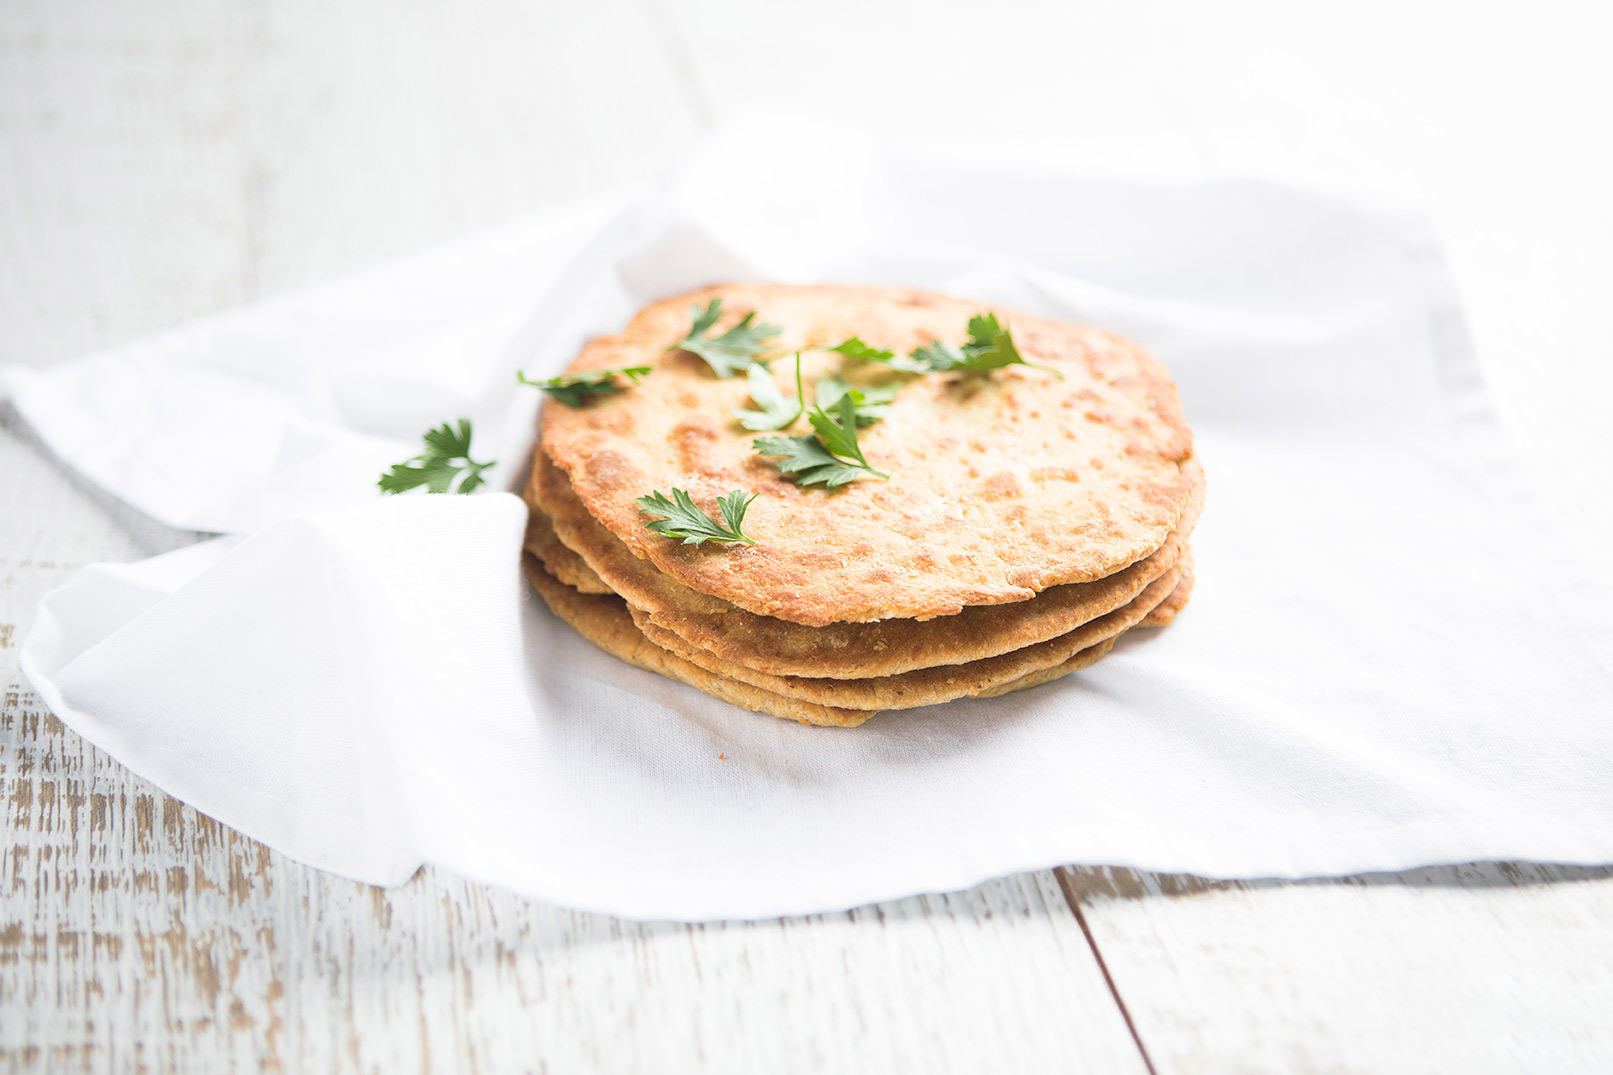 Image of three pieces of naan bread stacked in a pile on a plain cloth napkin and sprinkled with parsley